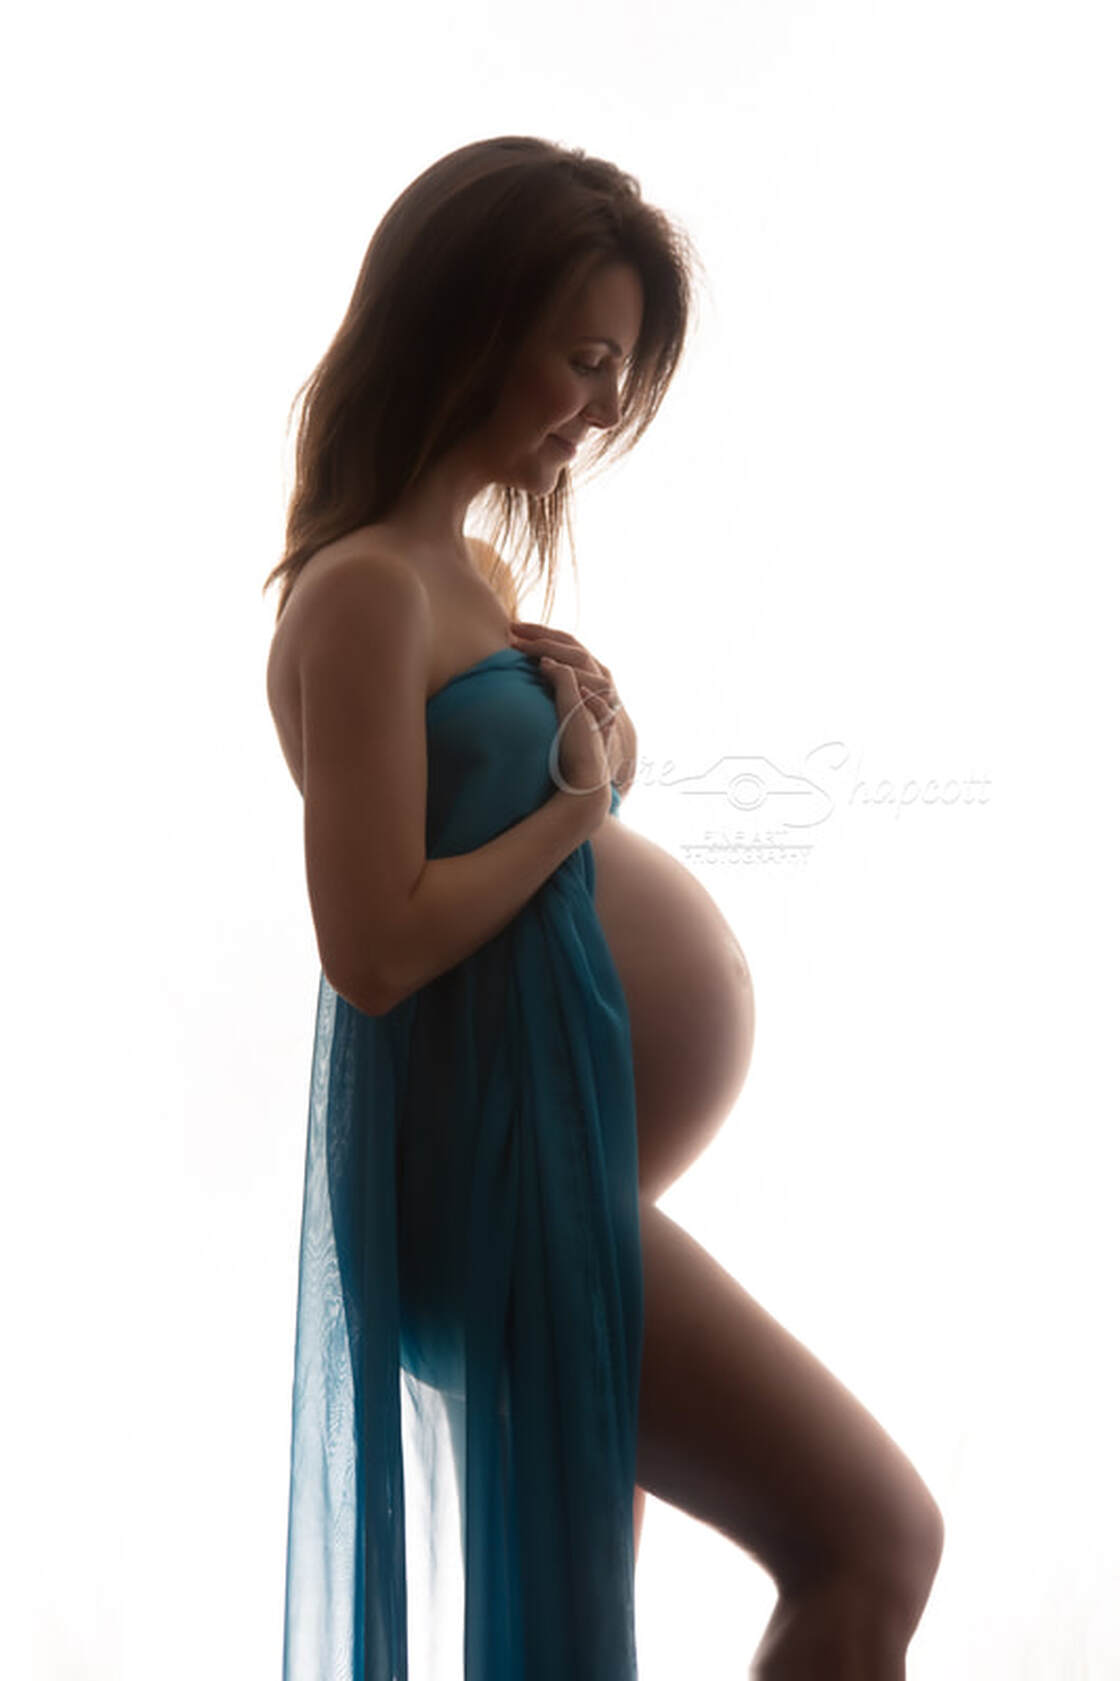 Woman with brown hair holds light blue material over herself as it droops to the floor during nude maternity photoshoot.